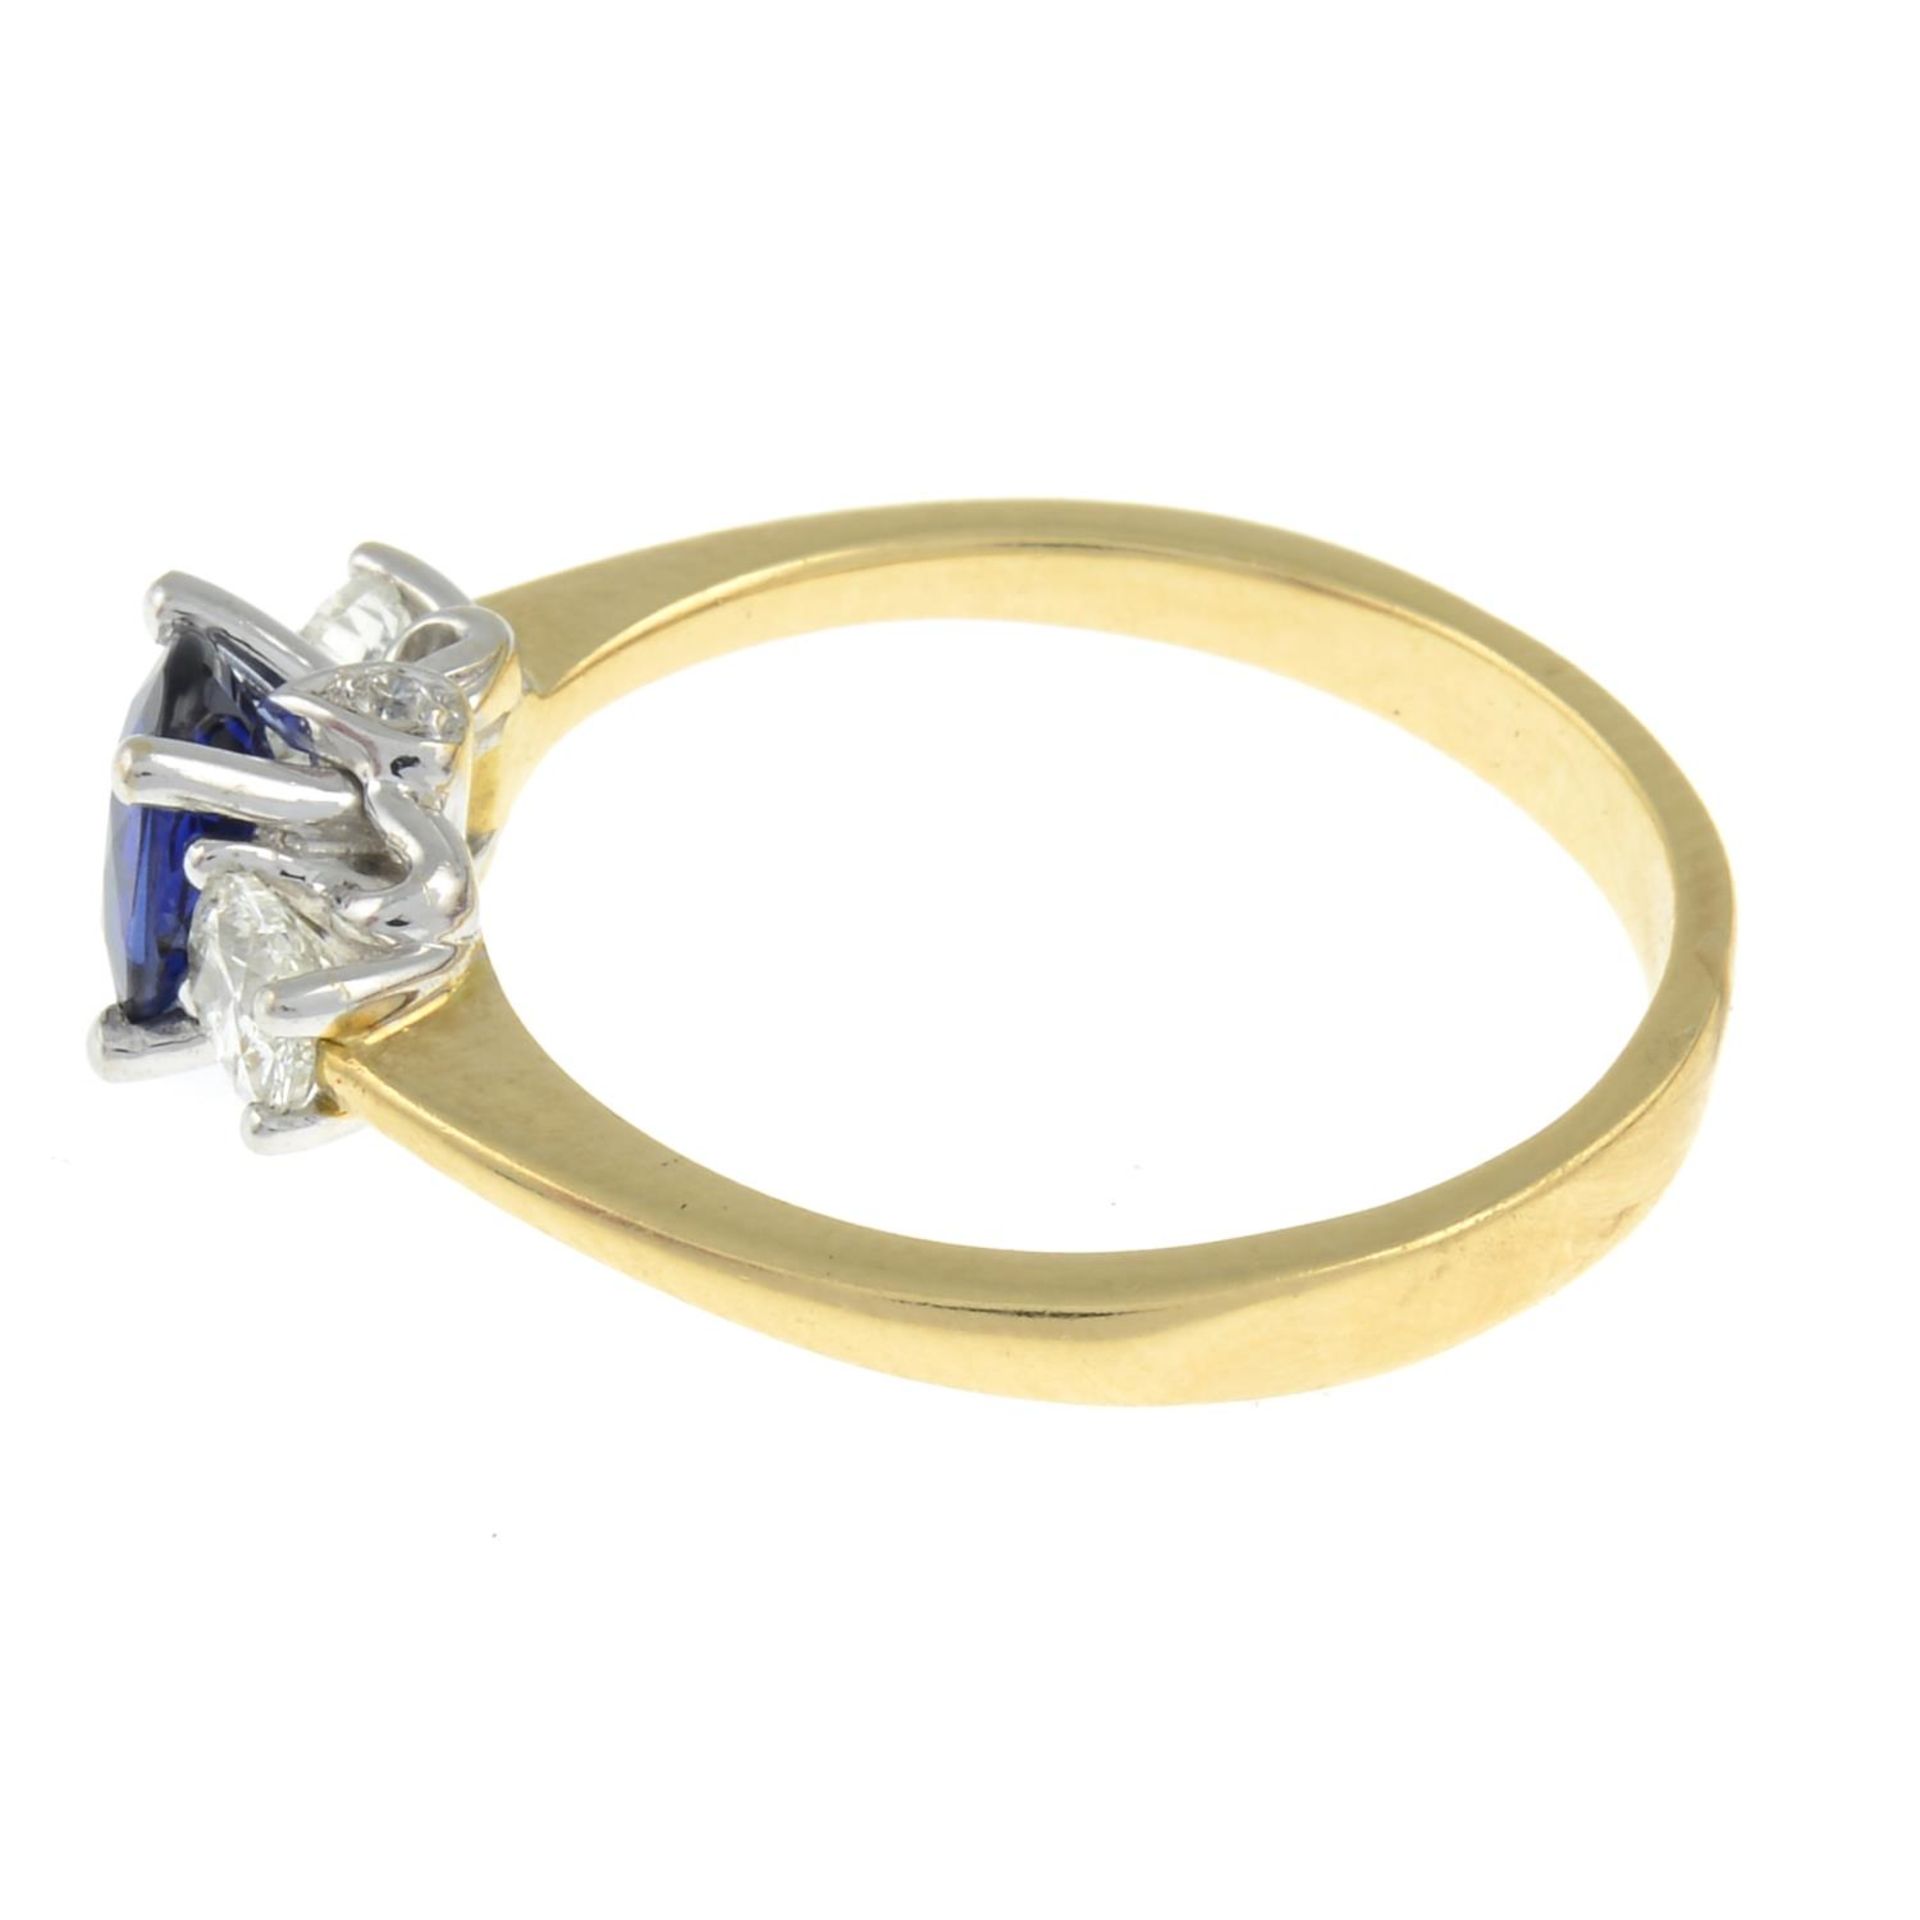 A sapphire and diamond three-stone ring, with diamond accent gallery. - Image 2 of 3